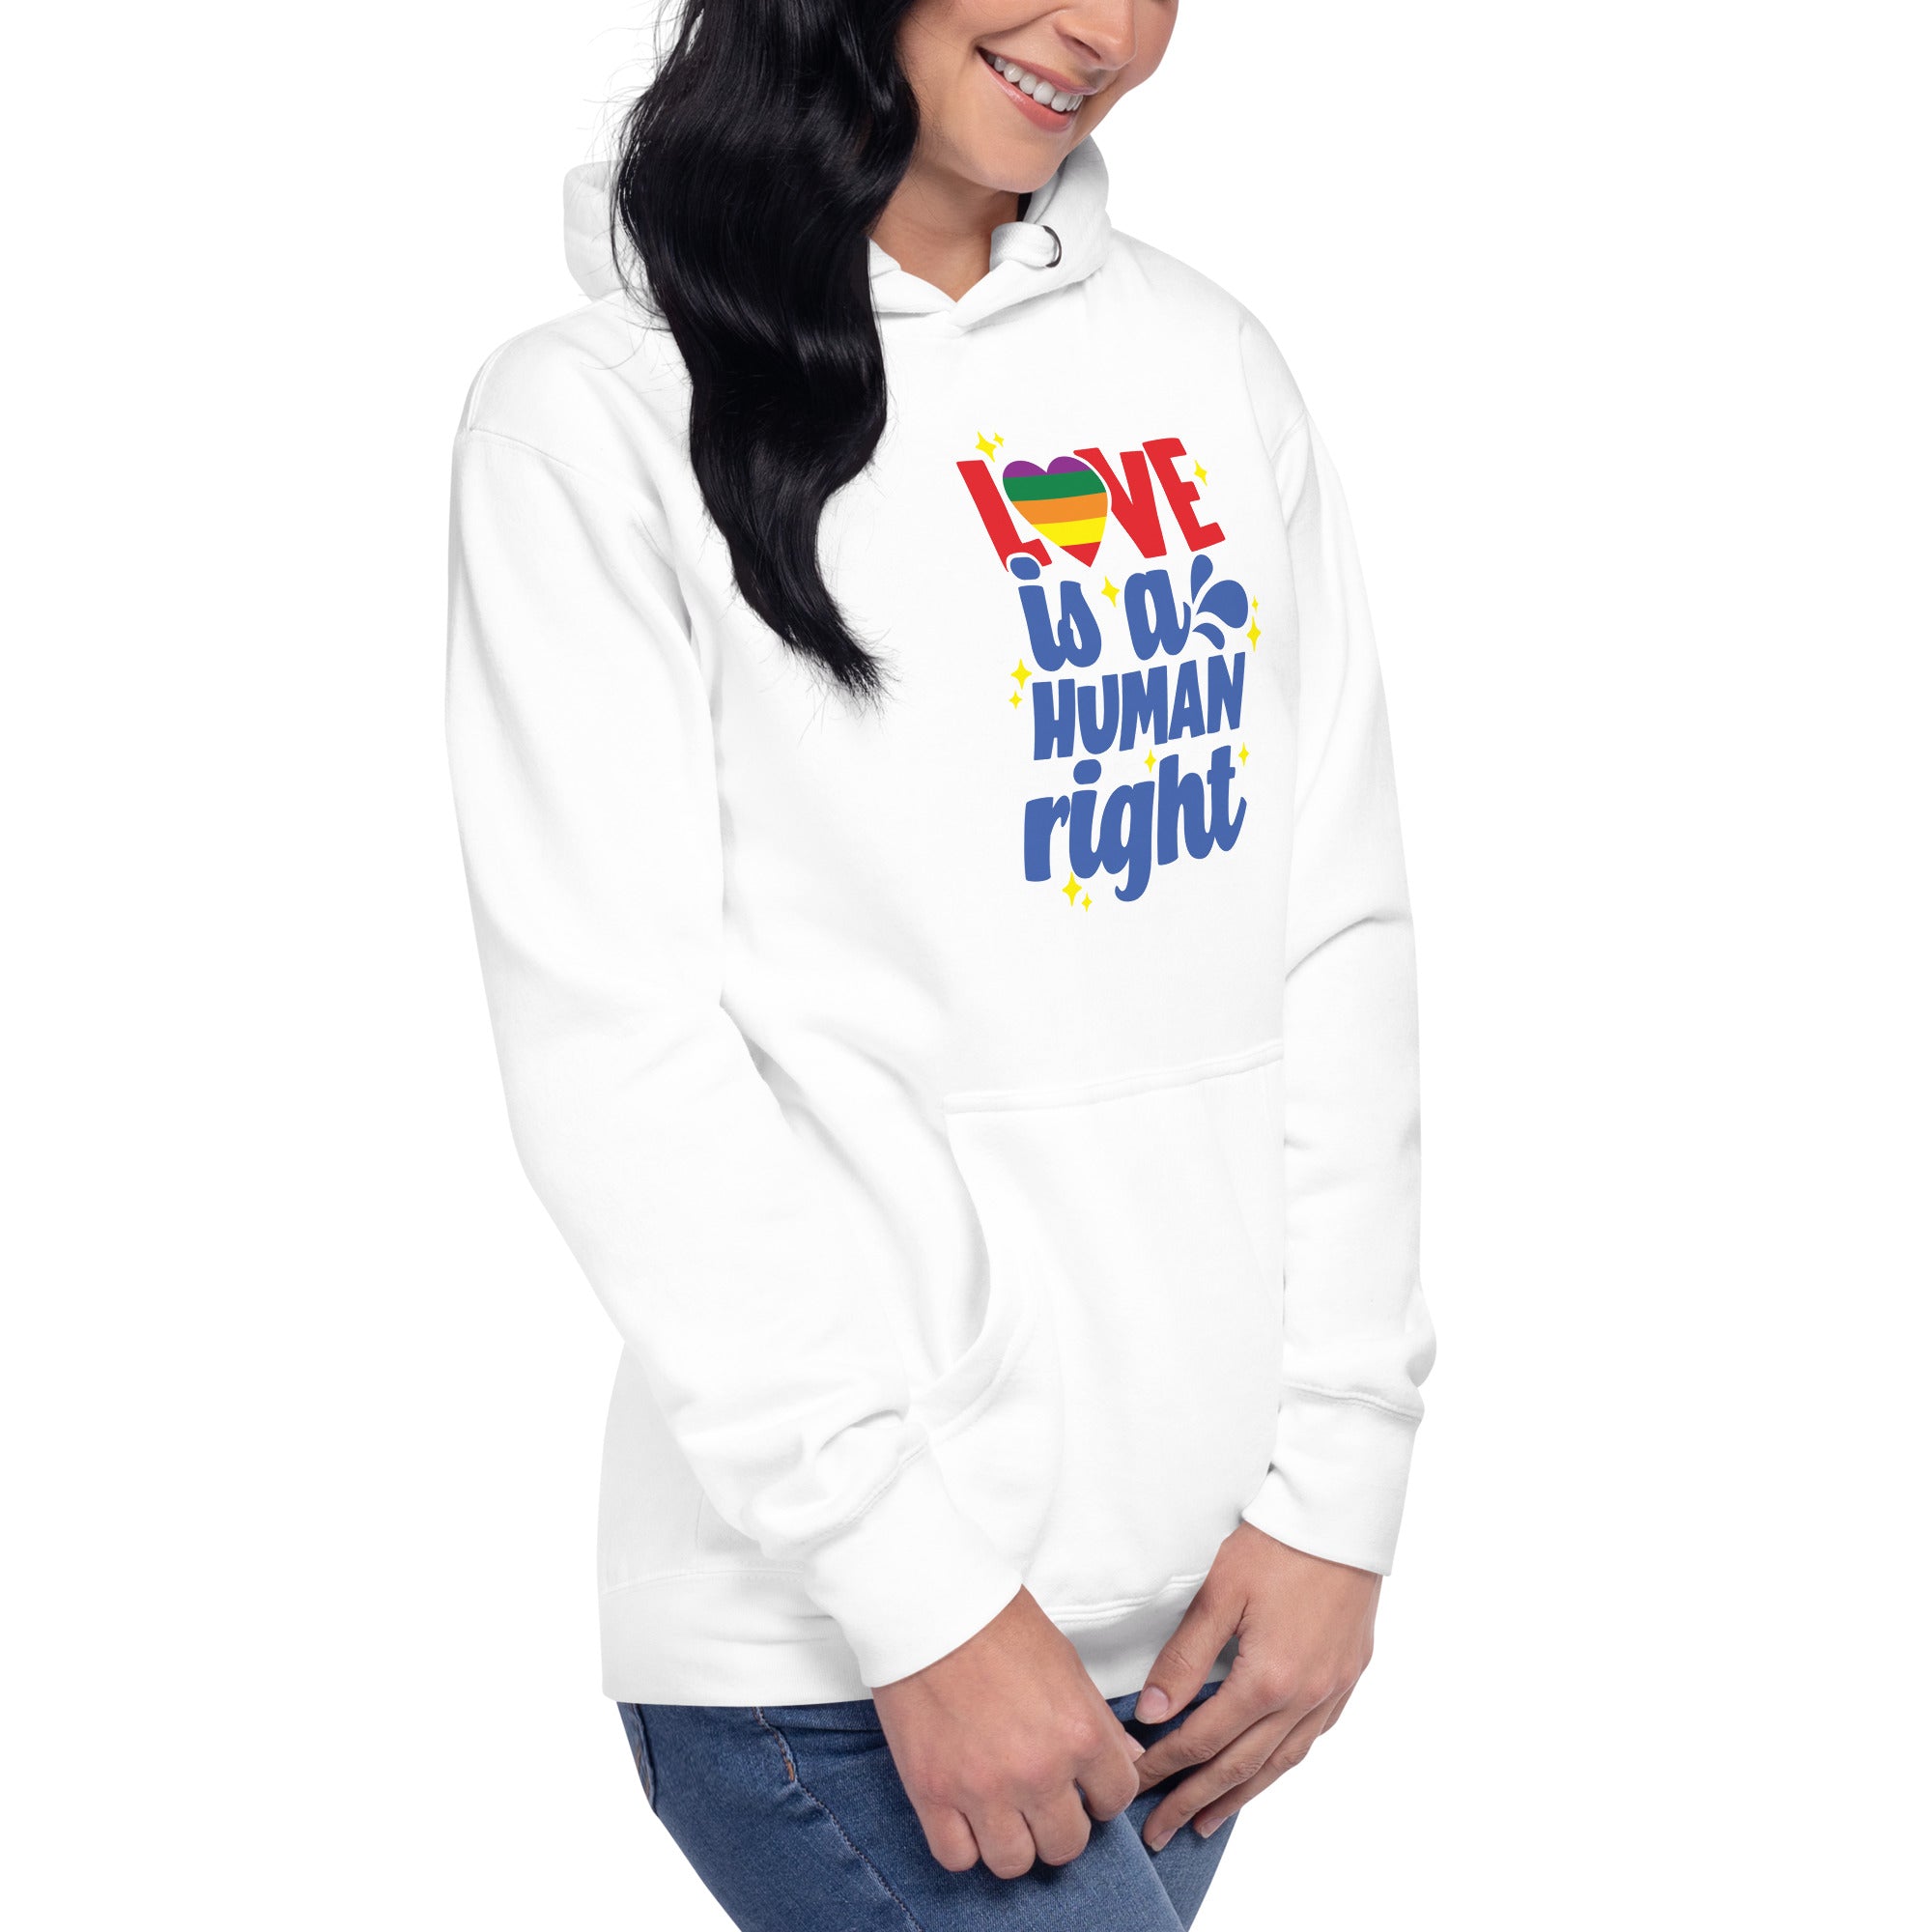 Unisex Hoodie- Love is a human right